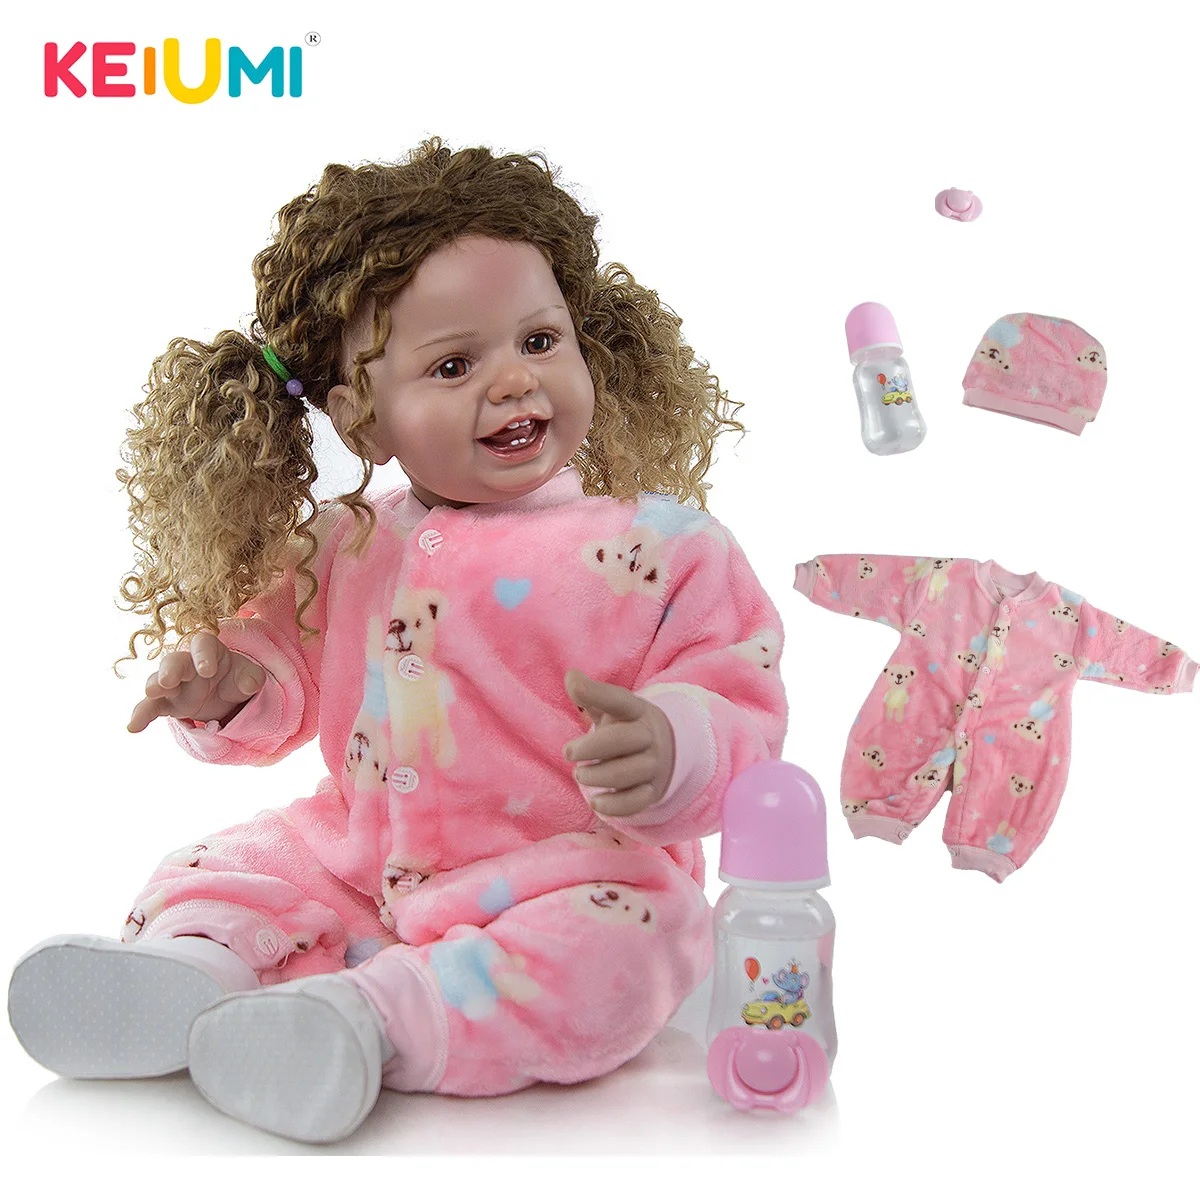 

KEIUMI 27 Inch High Quality Reborn Baby Girl Very Happy Cute Doll 68Cm Many Accessories For Kid Birthday Gifts